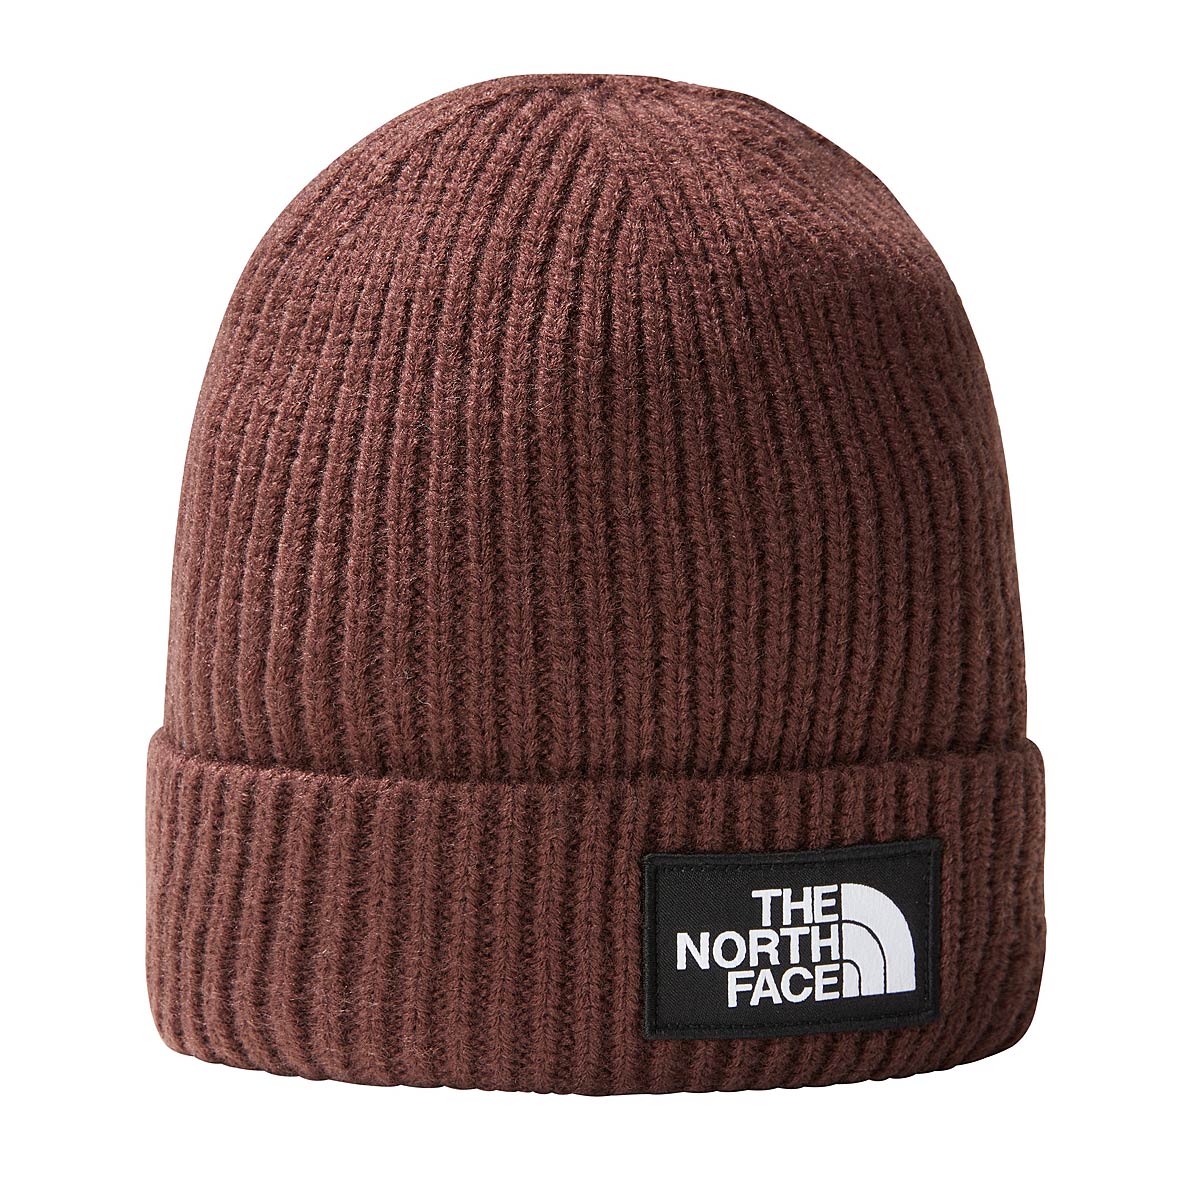 Image of The North Face Tnf Logo Box Cuf Beanie, Coal Brown